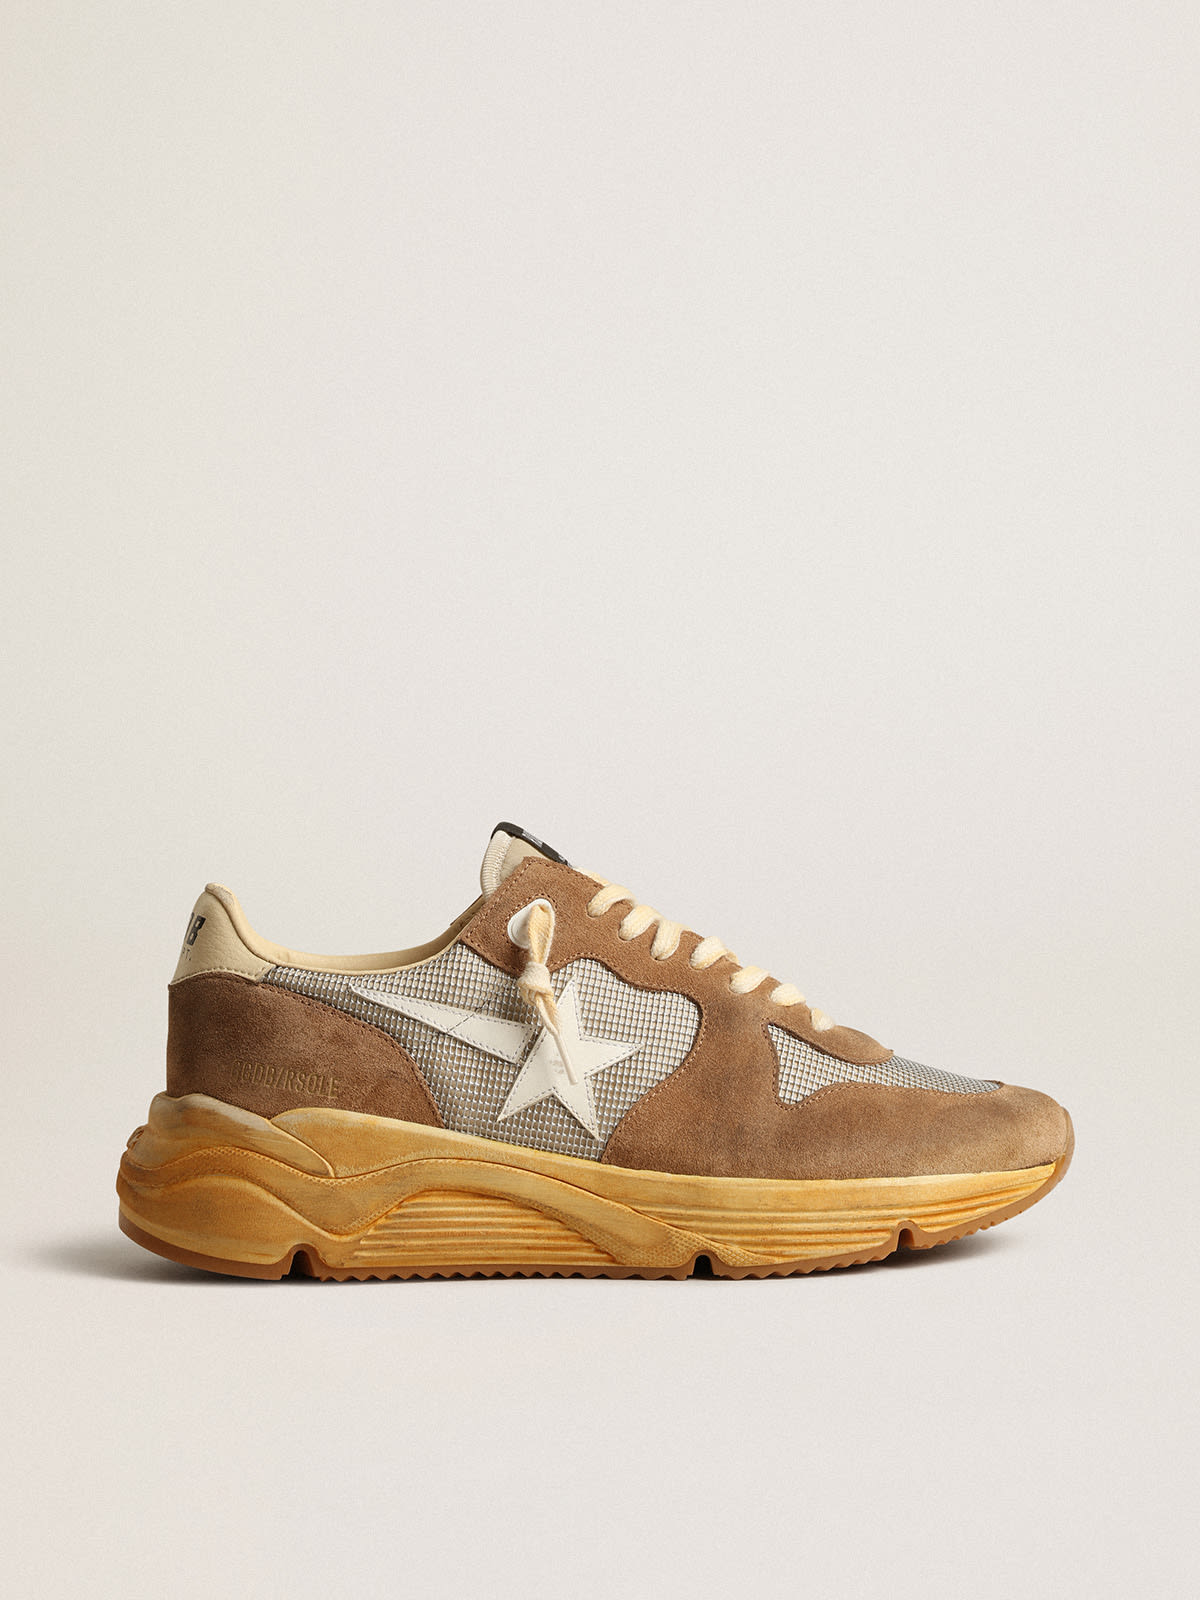 Golden Goose - Running Sole in silver mesh and tobacco suede with a white star in 